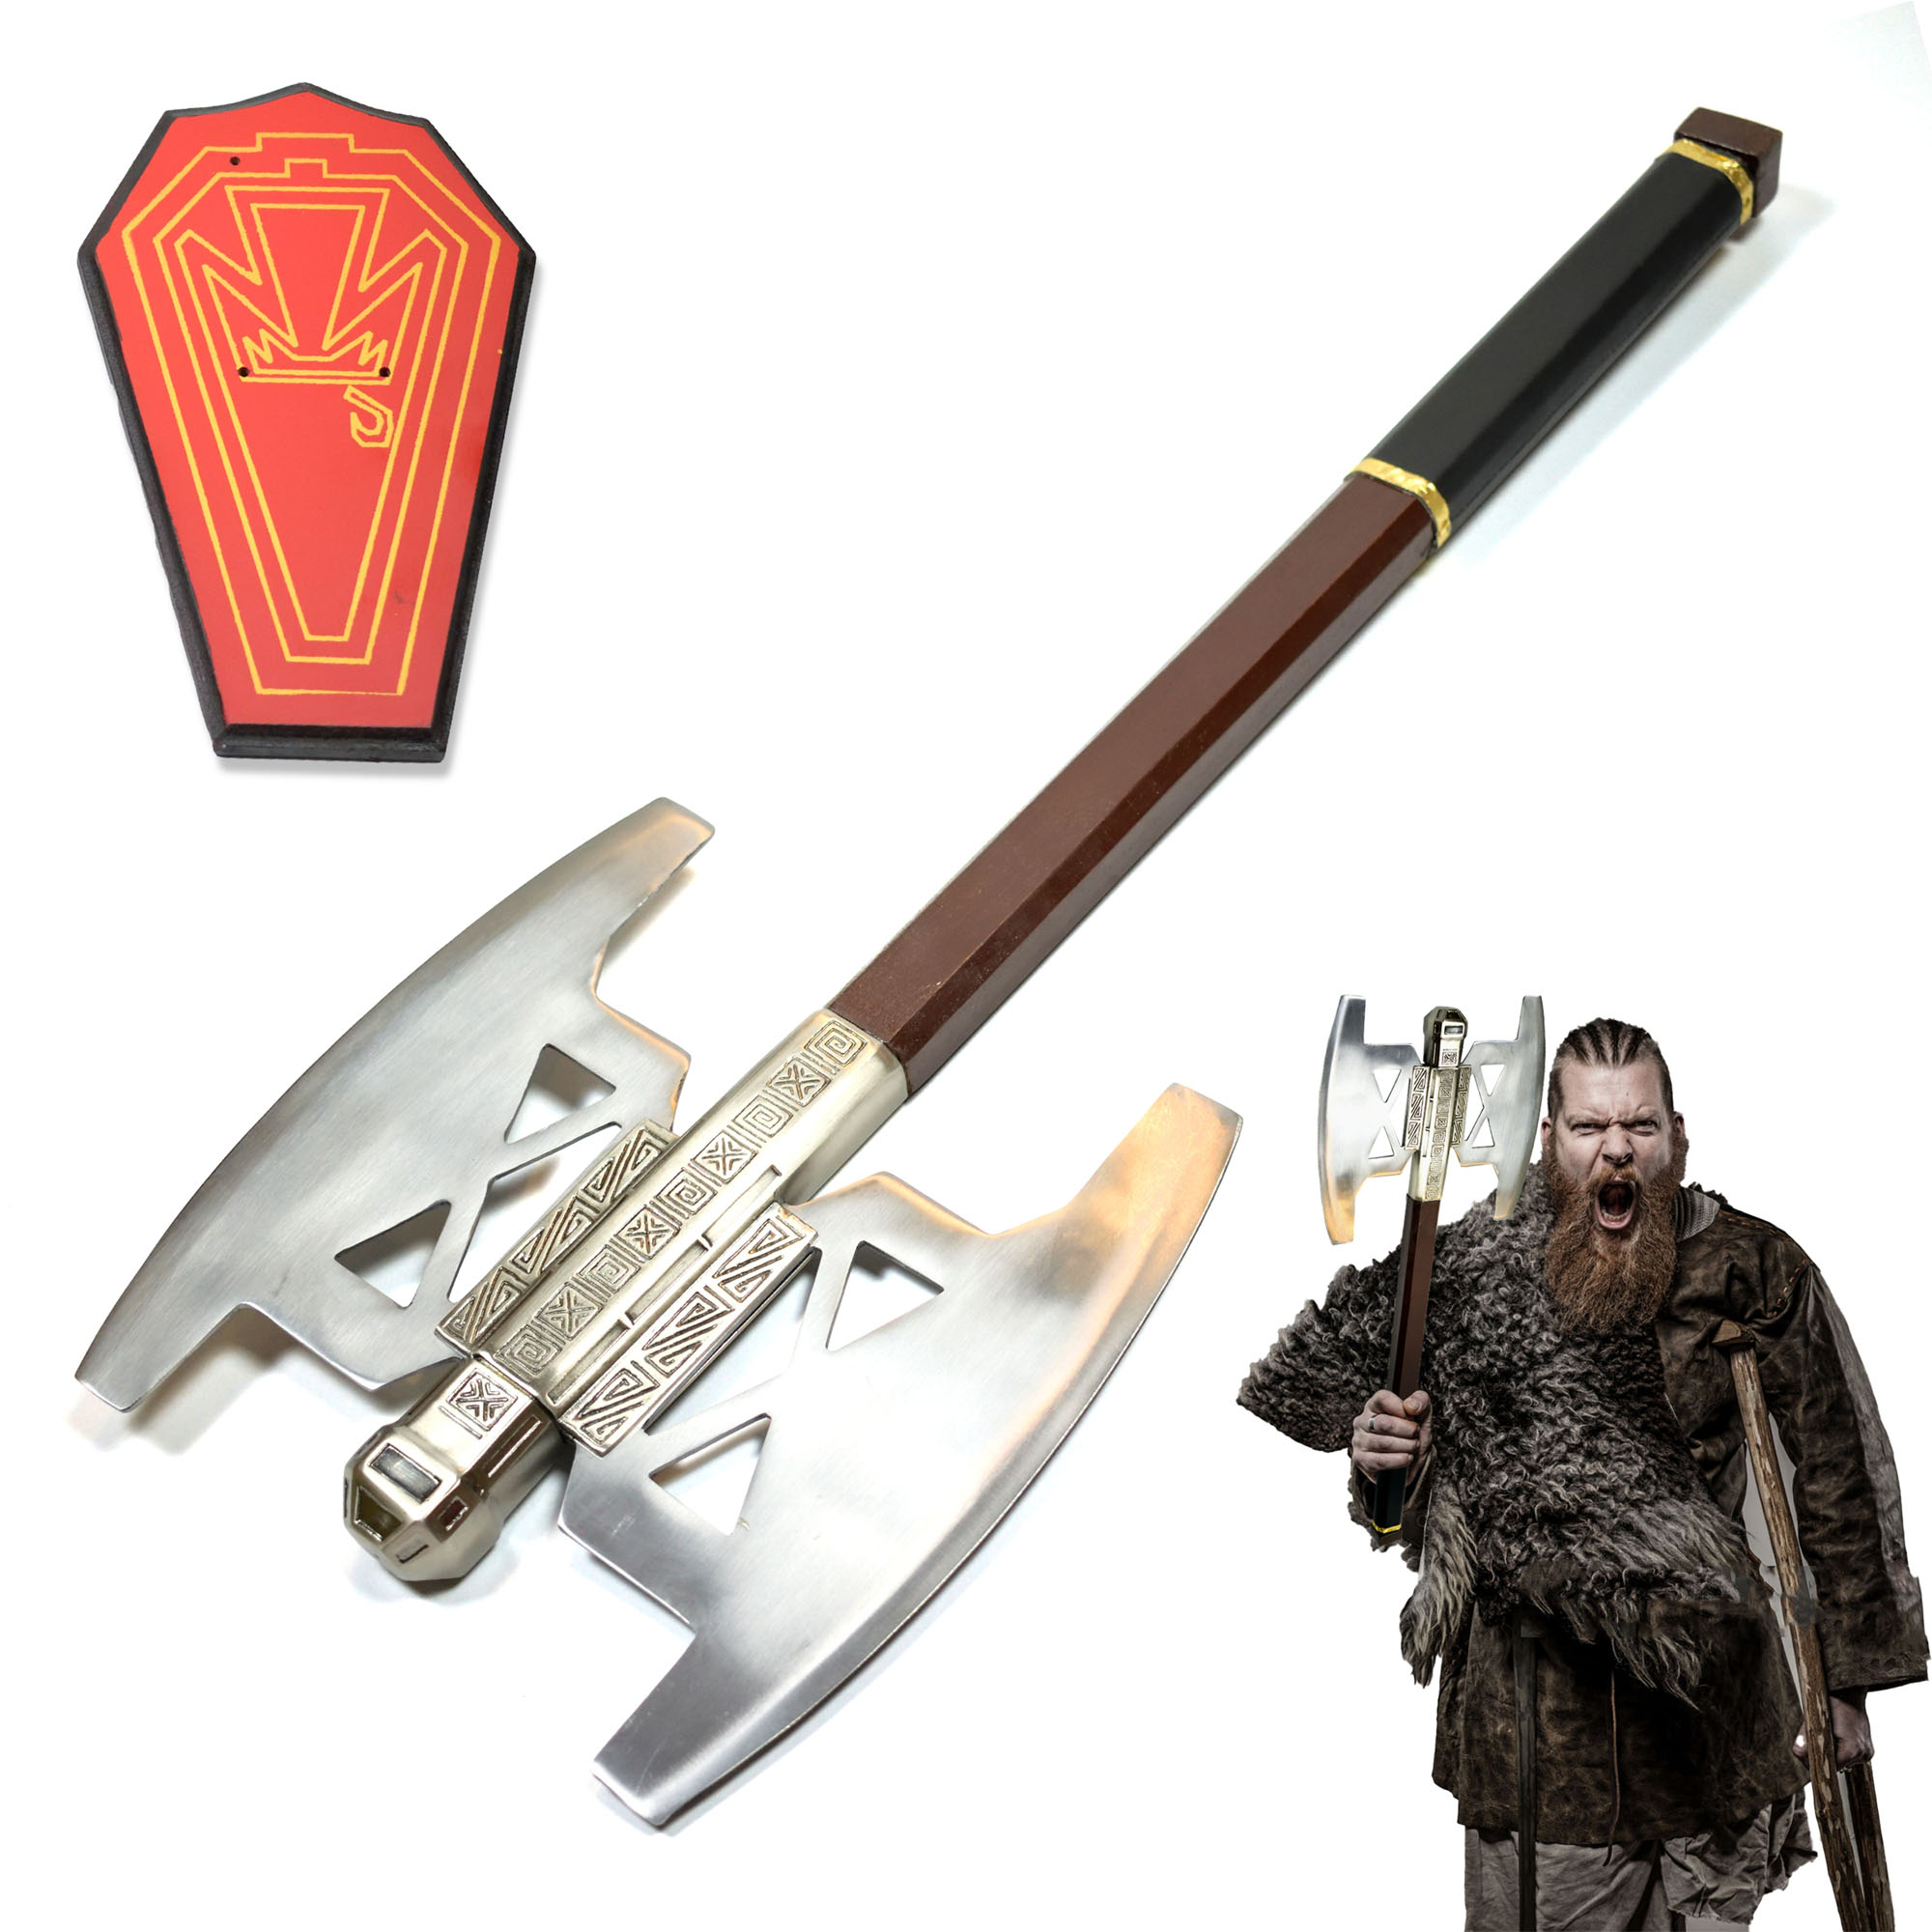 Axe of the dwarf